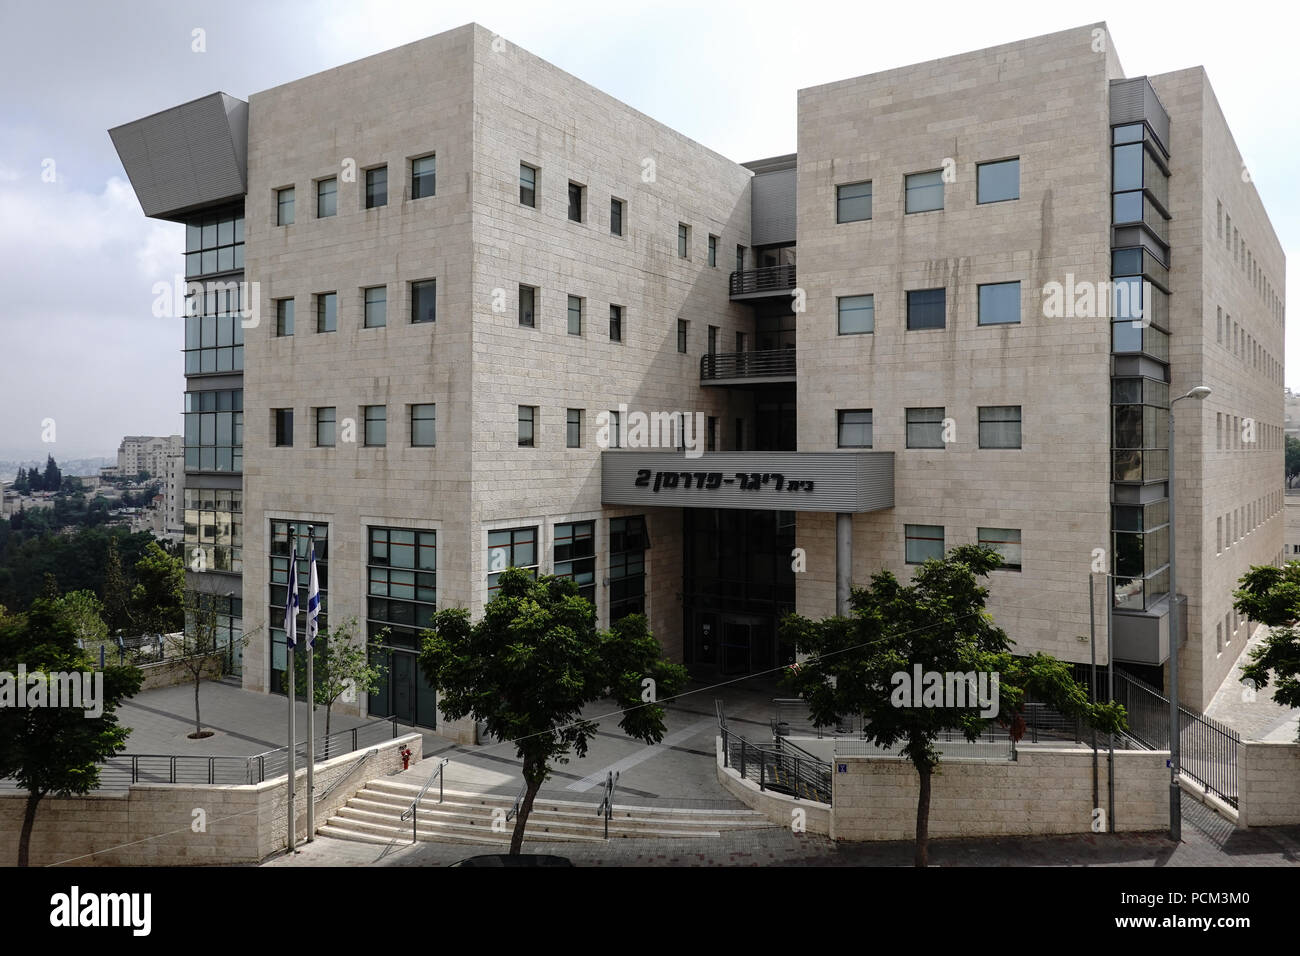 The Bet Din, Rabbinical Court, in Jerusalem is housed in the Riger Federman 2 building in the neighborhood of Givat Shaul. Stock Photo